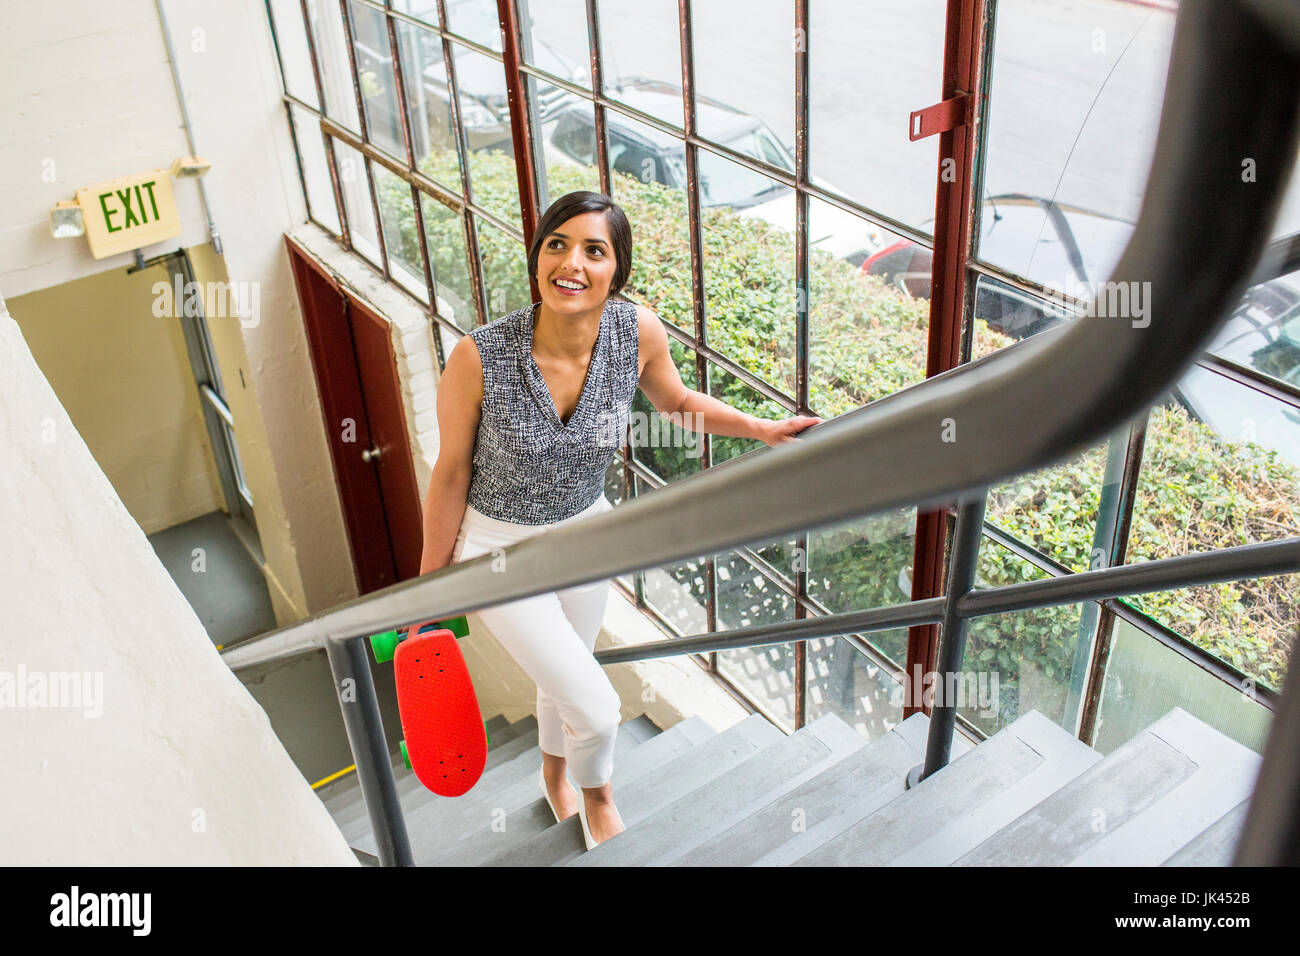 Asian woman carrying skateboard on staircase Banque D'Images